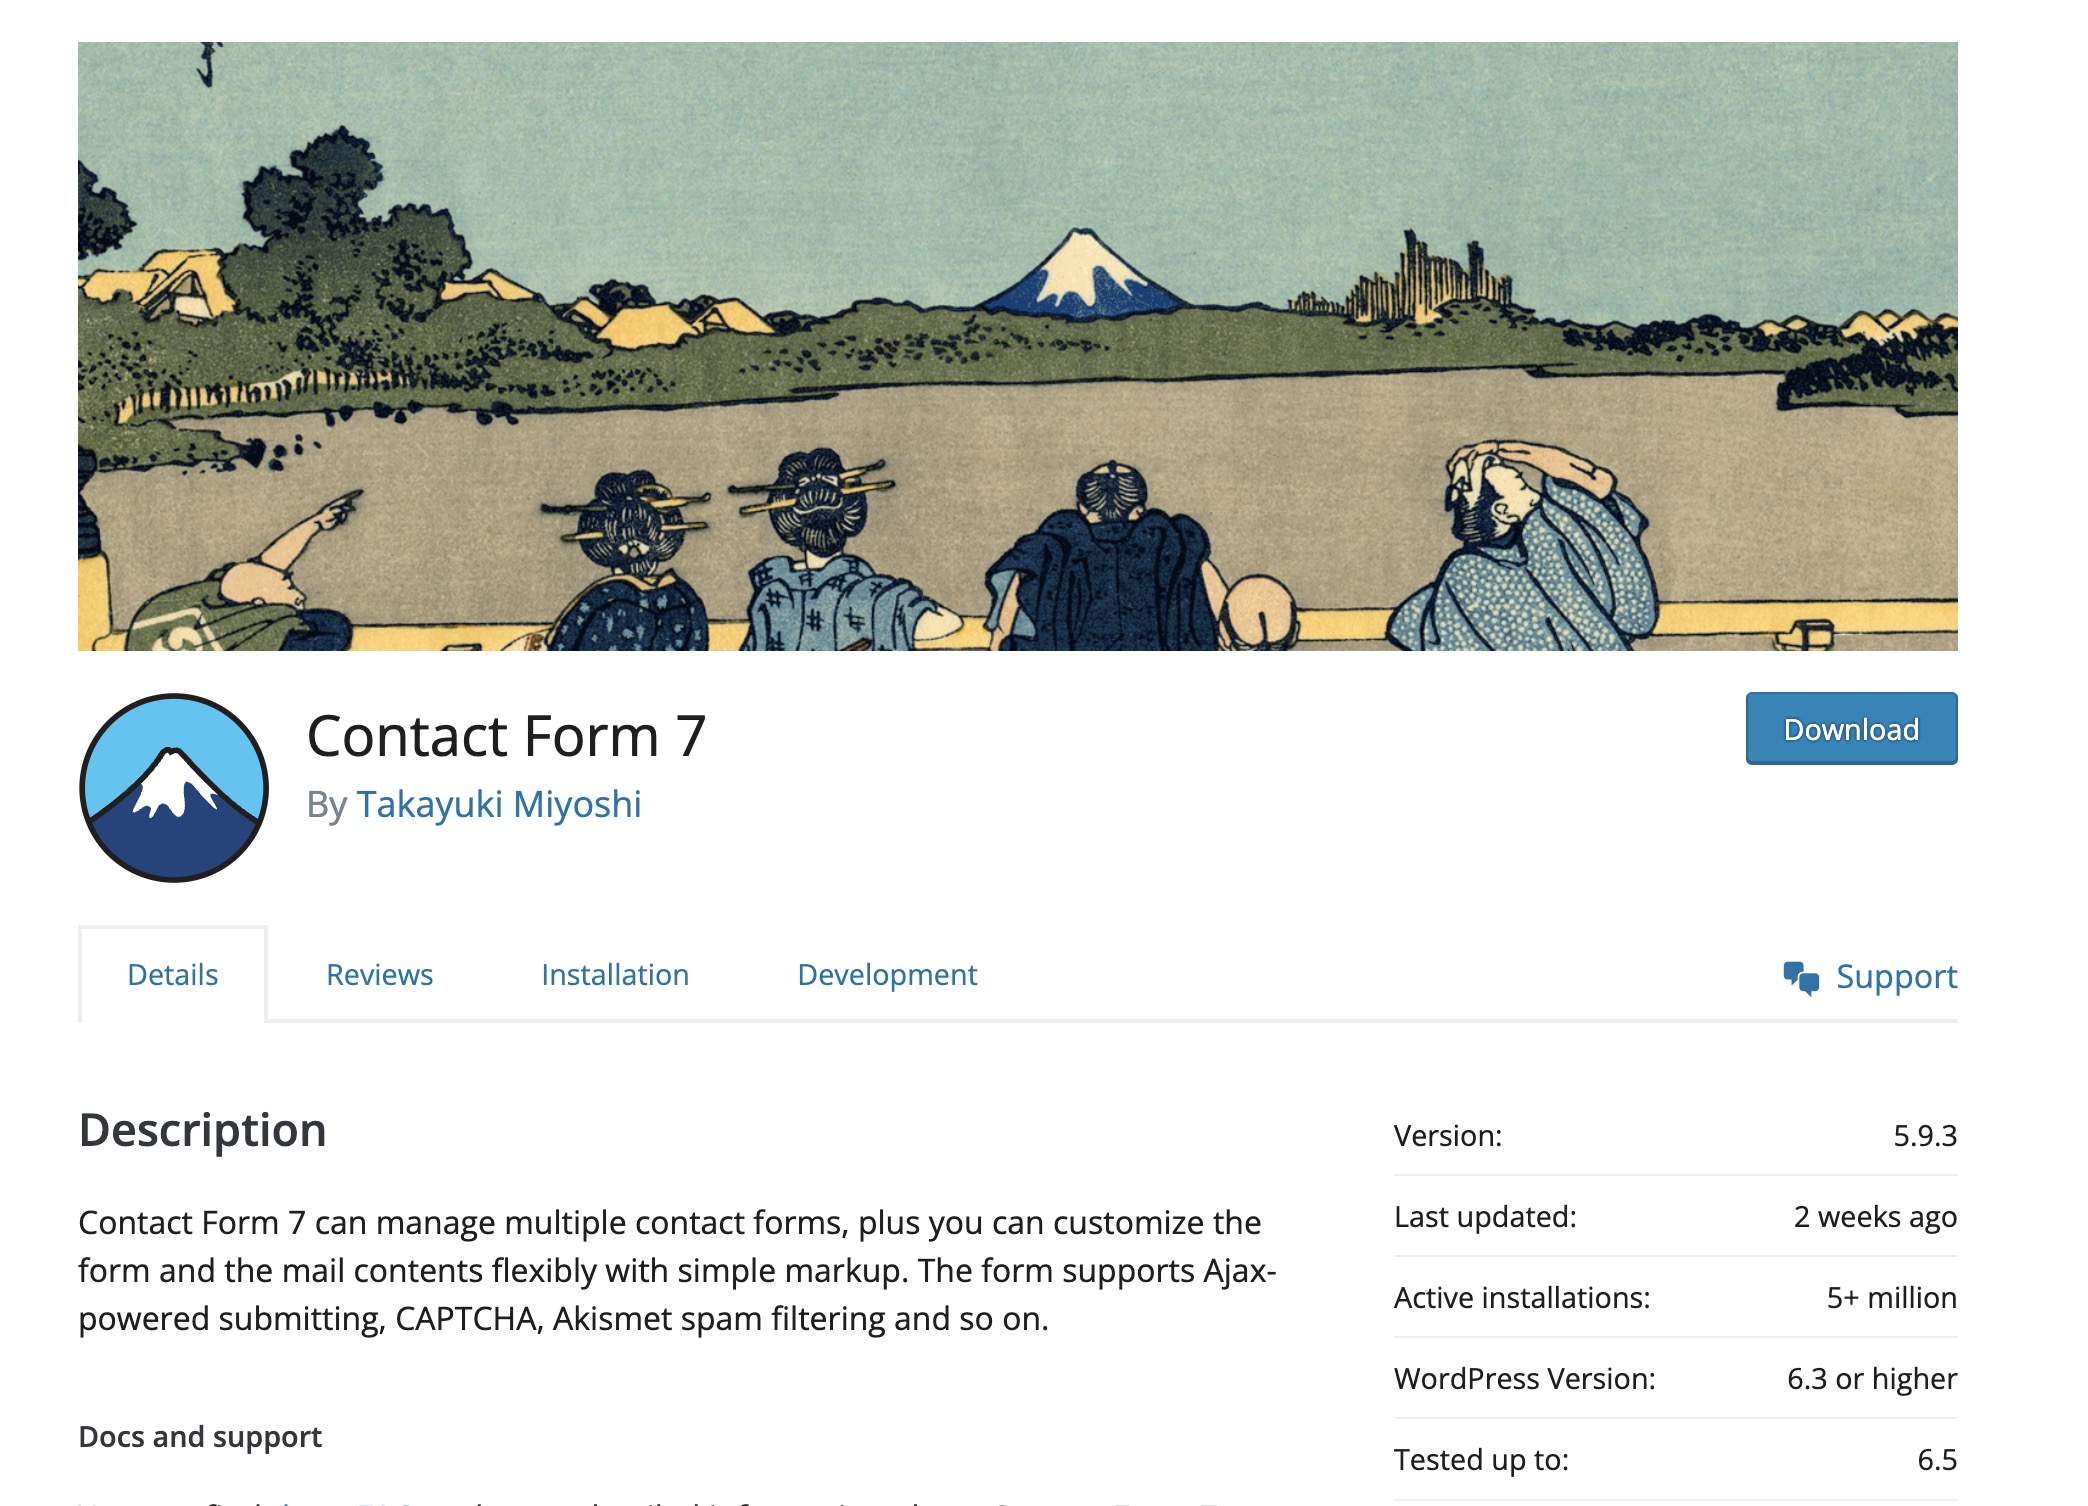 Contact Form 7 webpage